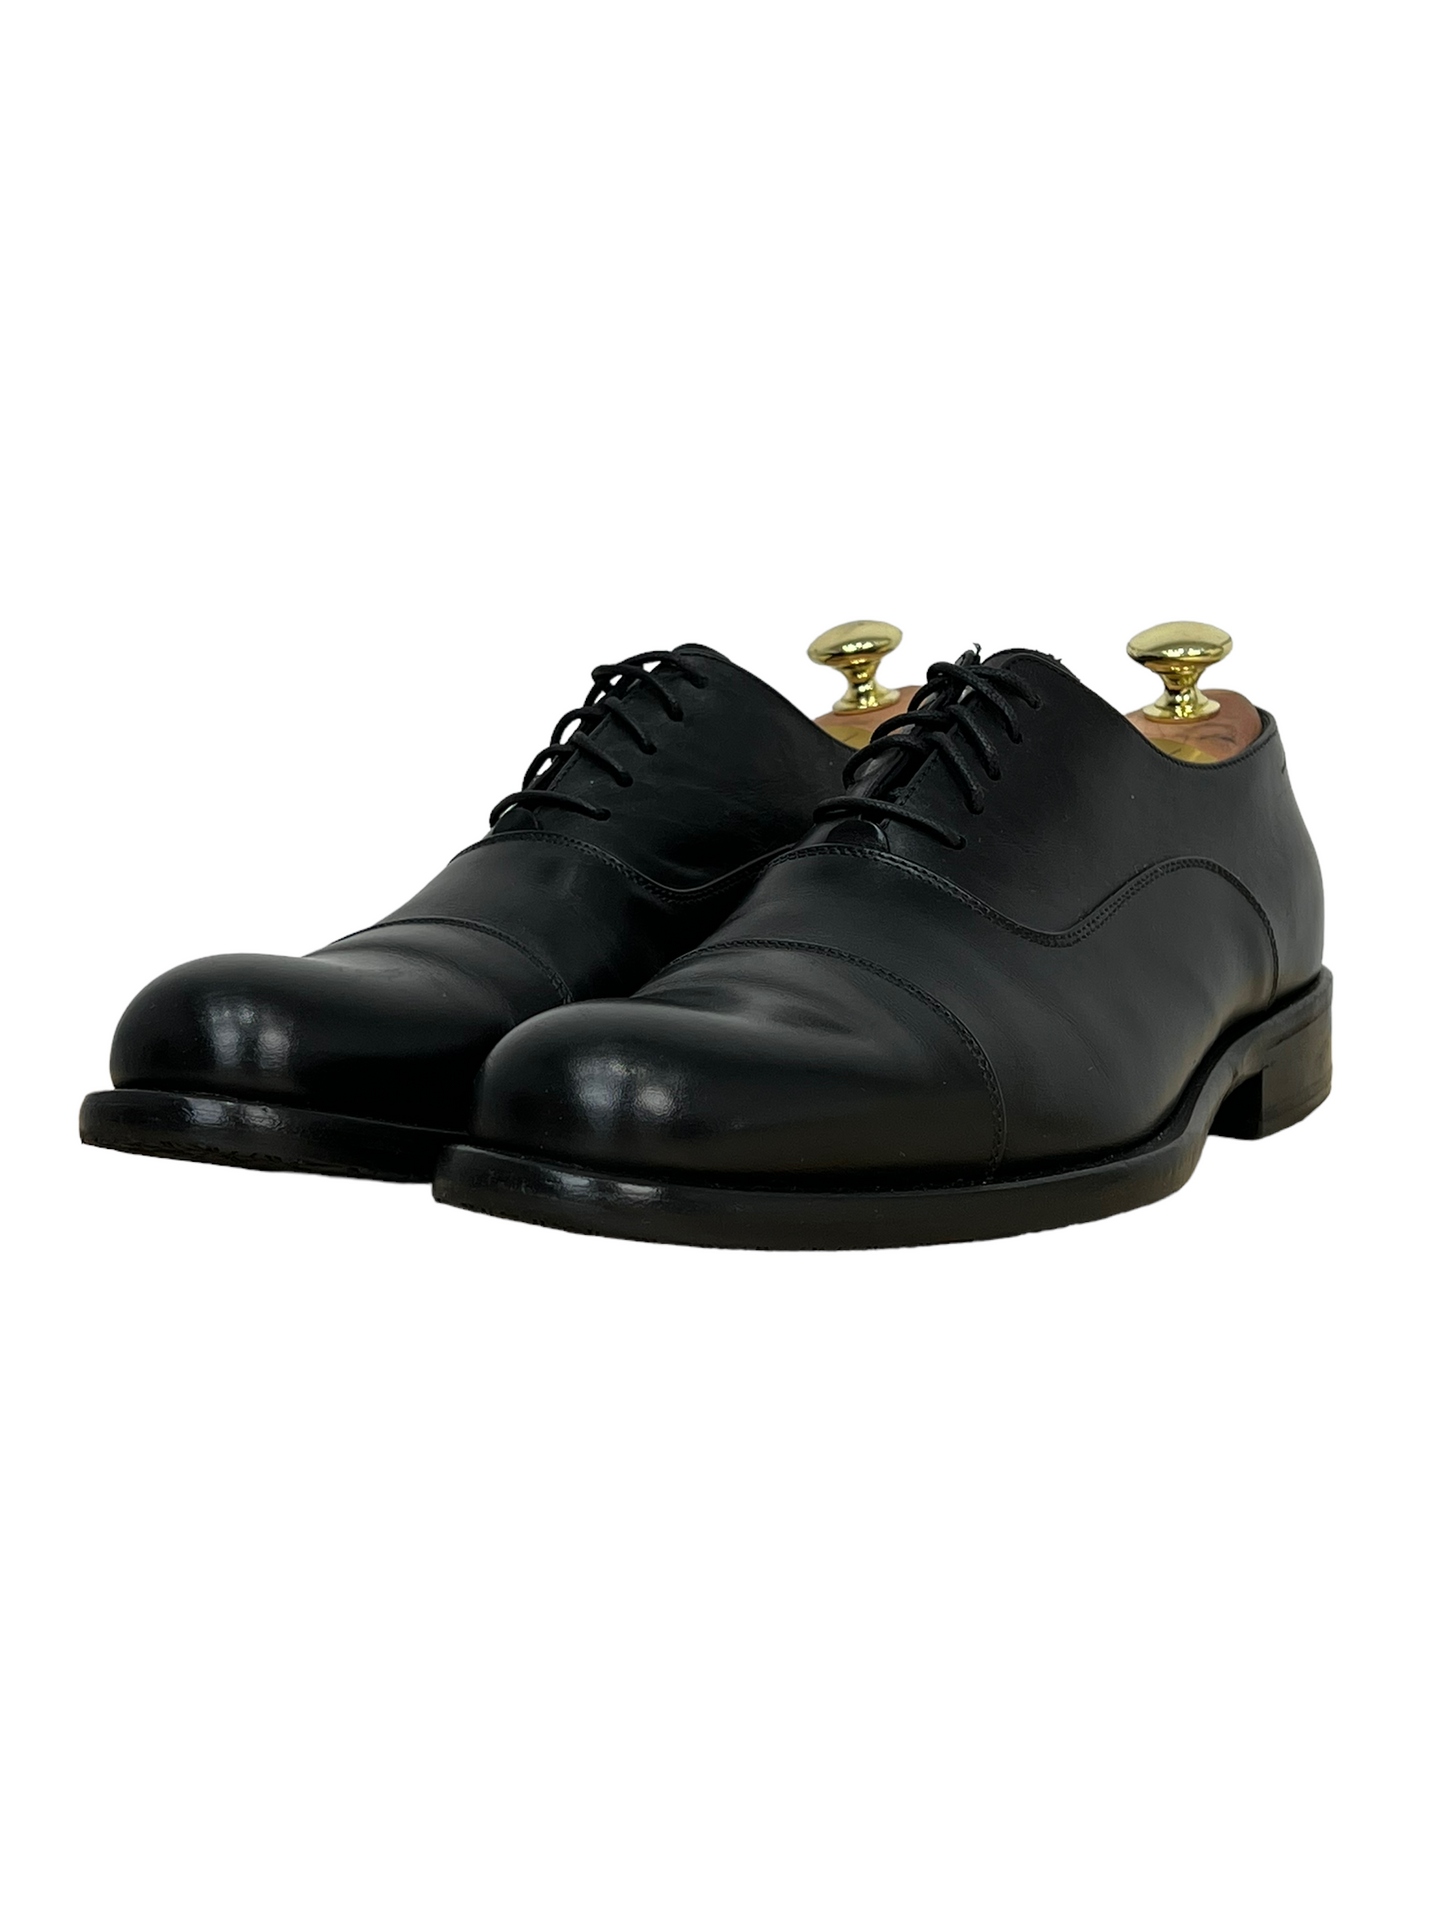 Giorgio Armani Black Leather Cap Toe Oxford Dress Shoes - Genuine Design Luxury Consignment for Men. New & Pre-Owned Clothing, Shoes, & Accessories. Calgary, Canada